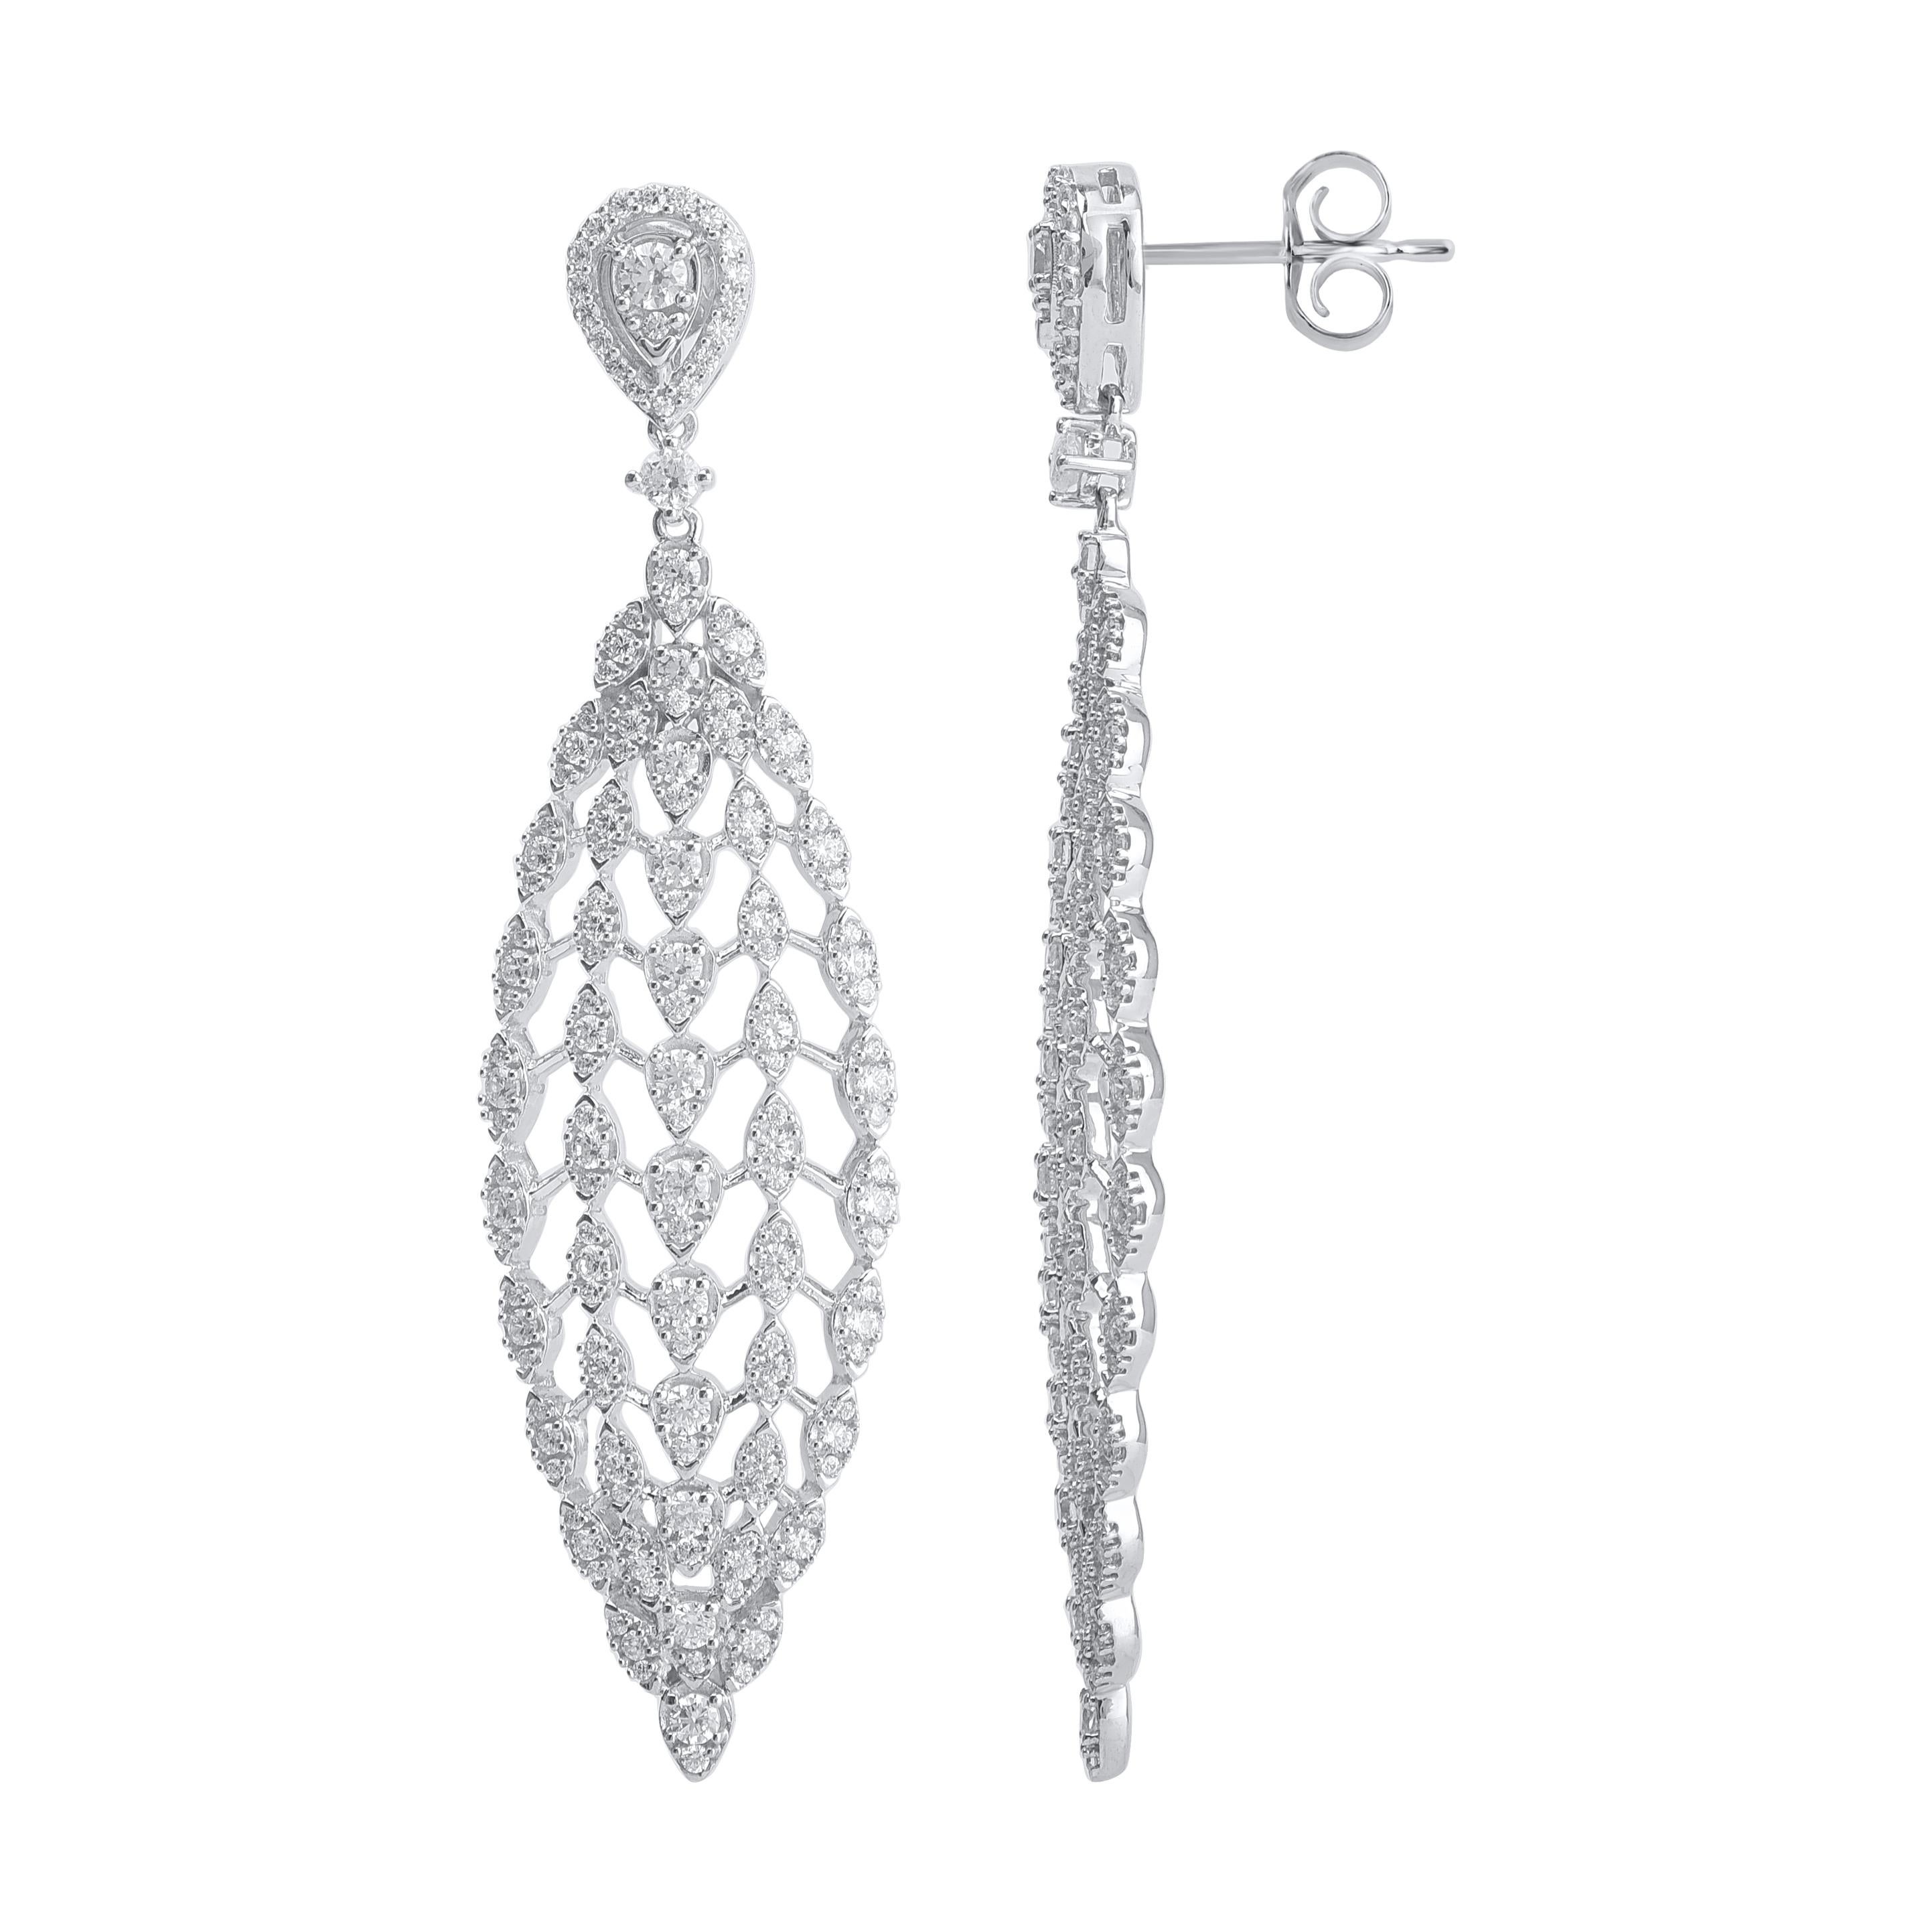 Top of your favorite look with this stunning diamond designer drop earrings. Beautifully hand-crafted by our inhouse experts in 14 karat white gold and embellished with 318 brilliant cut and single cut diamonds in prong setting and shimmers with H-I